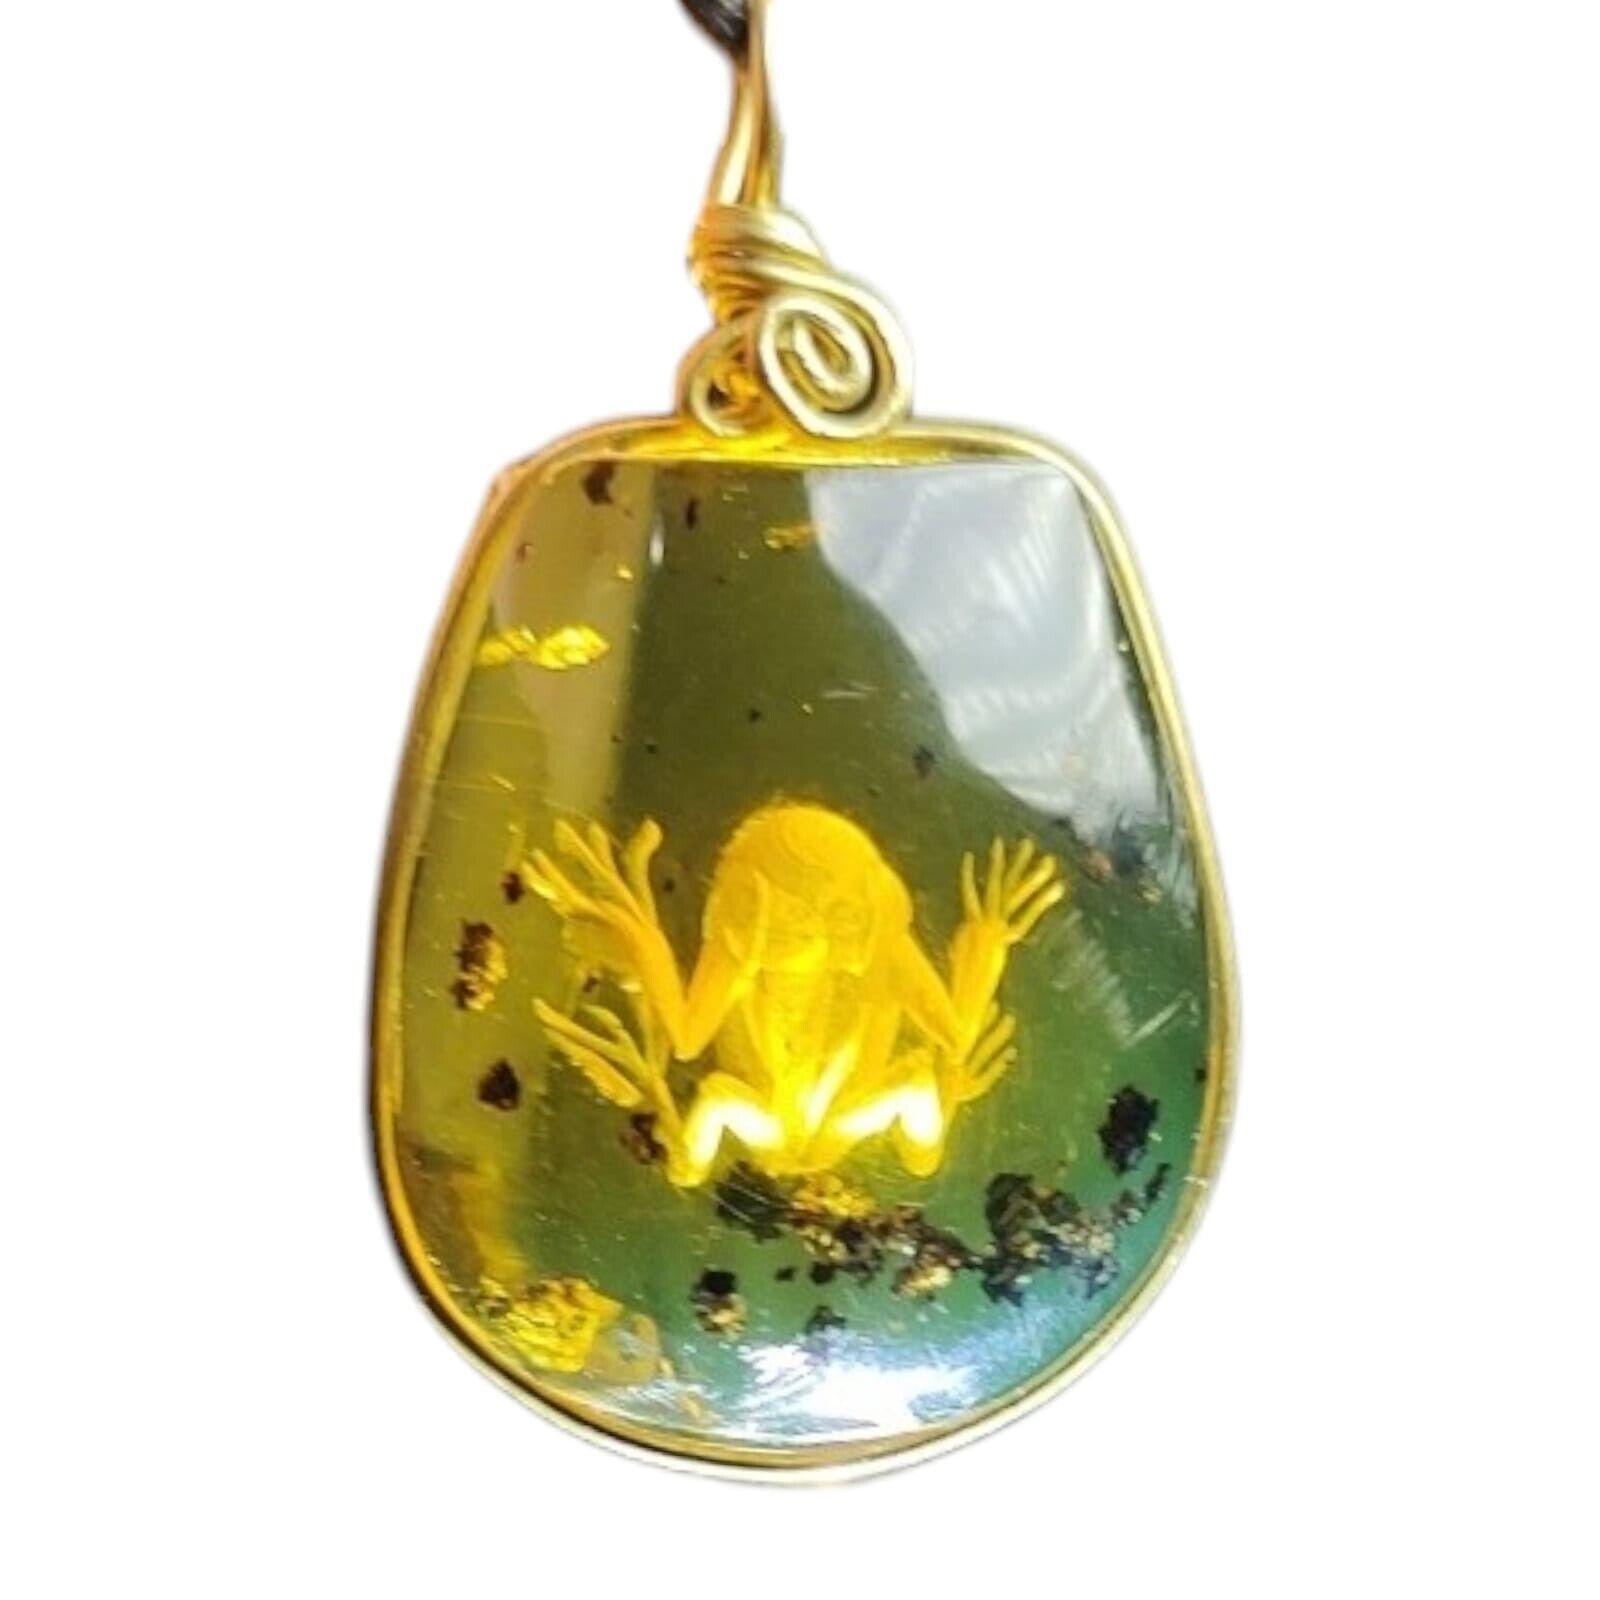 Amber Mexican Pendant Frog Mossy Carved Handcrafted Amazing Quality